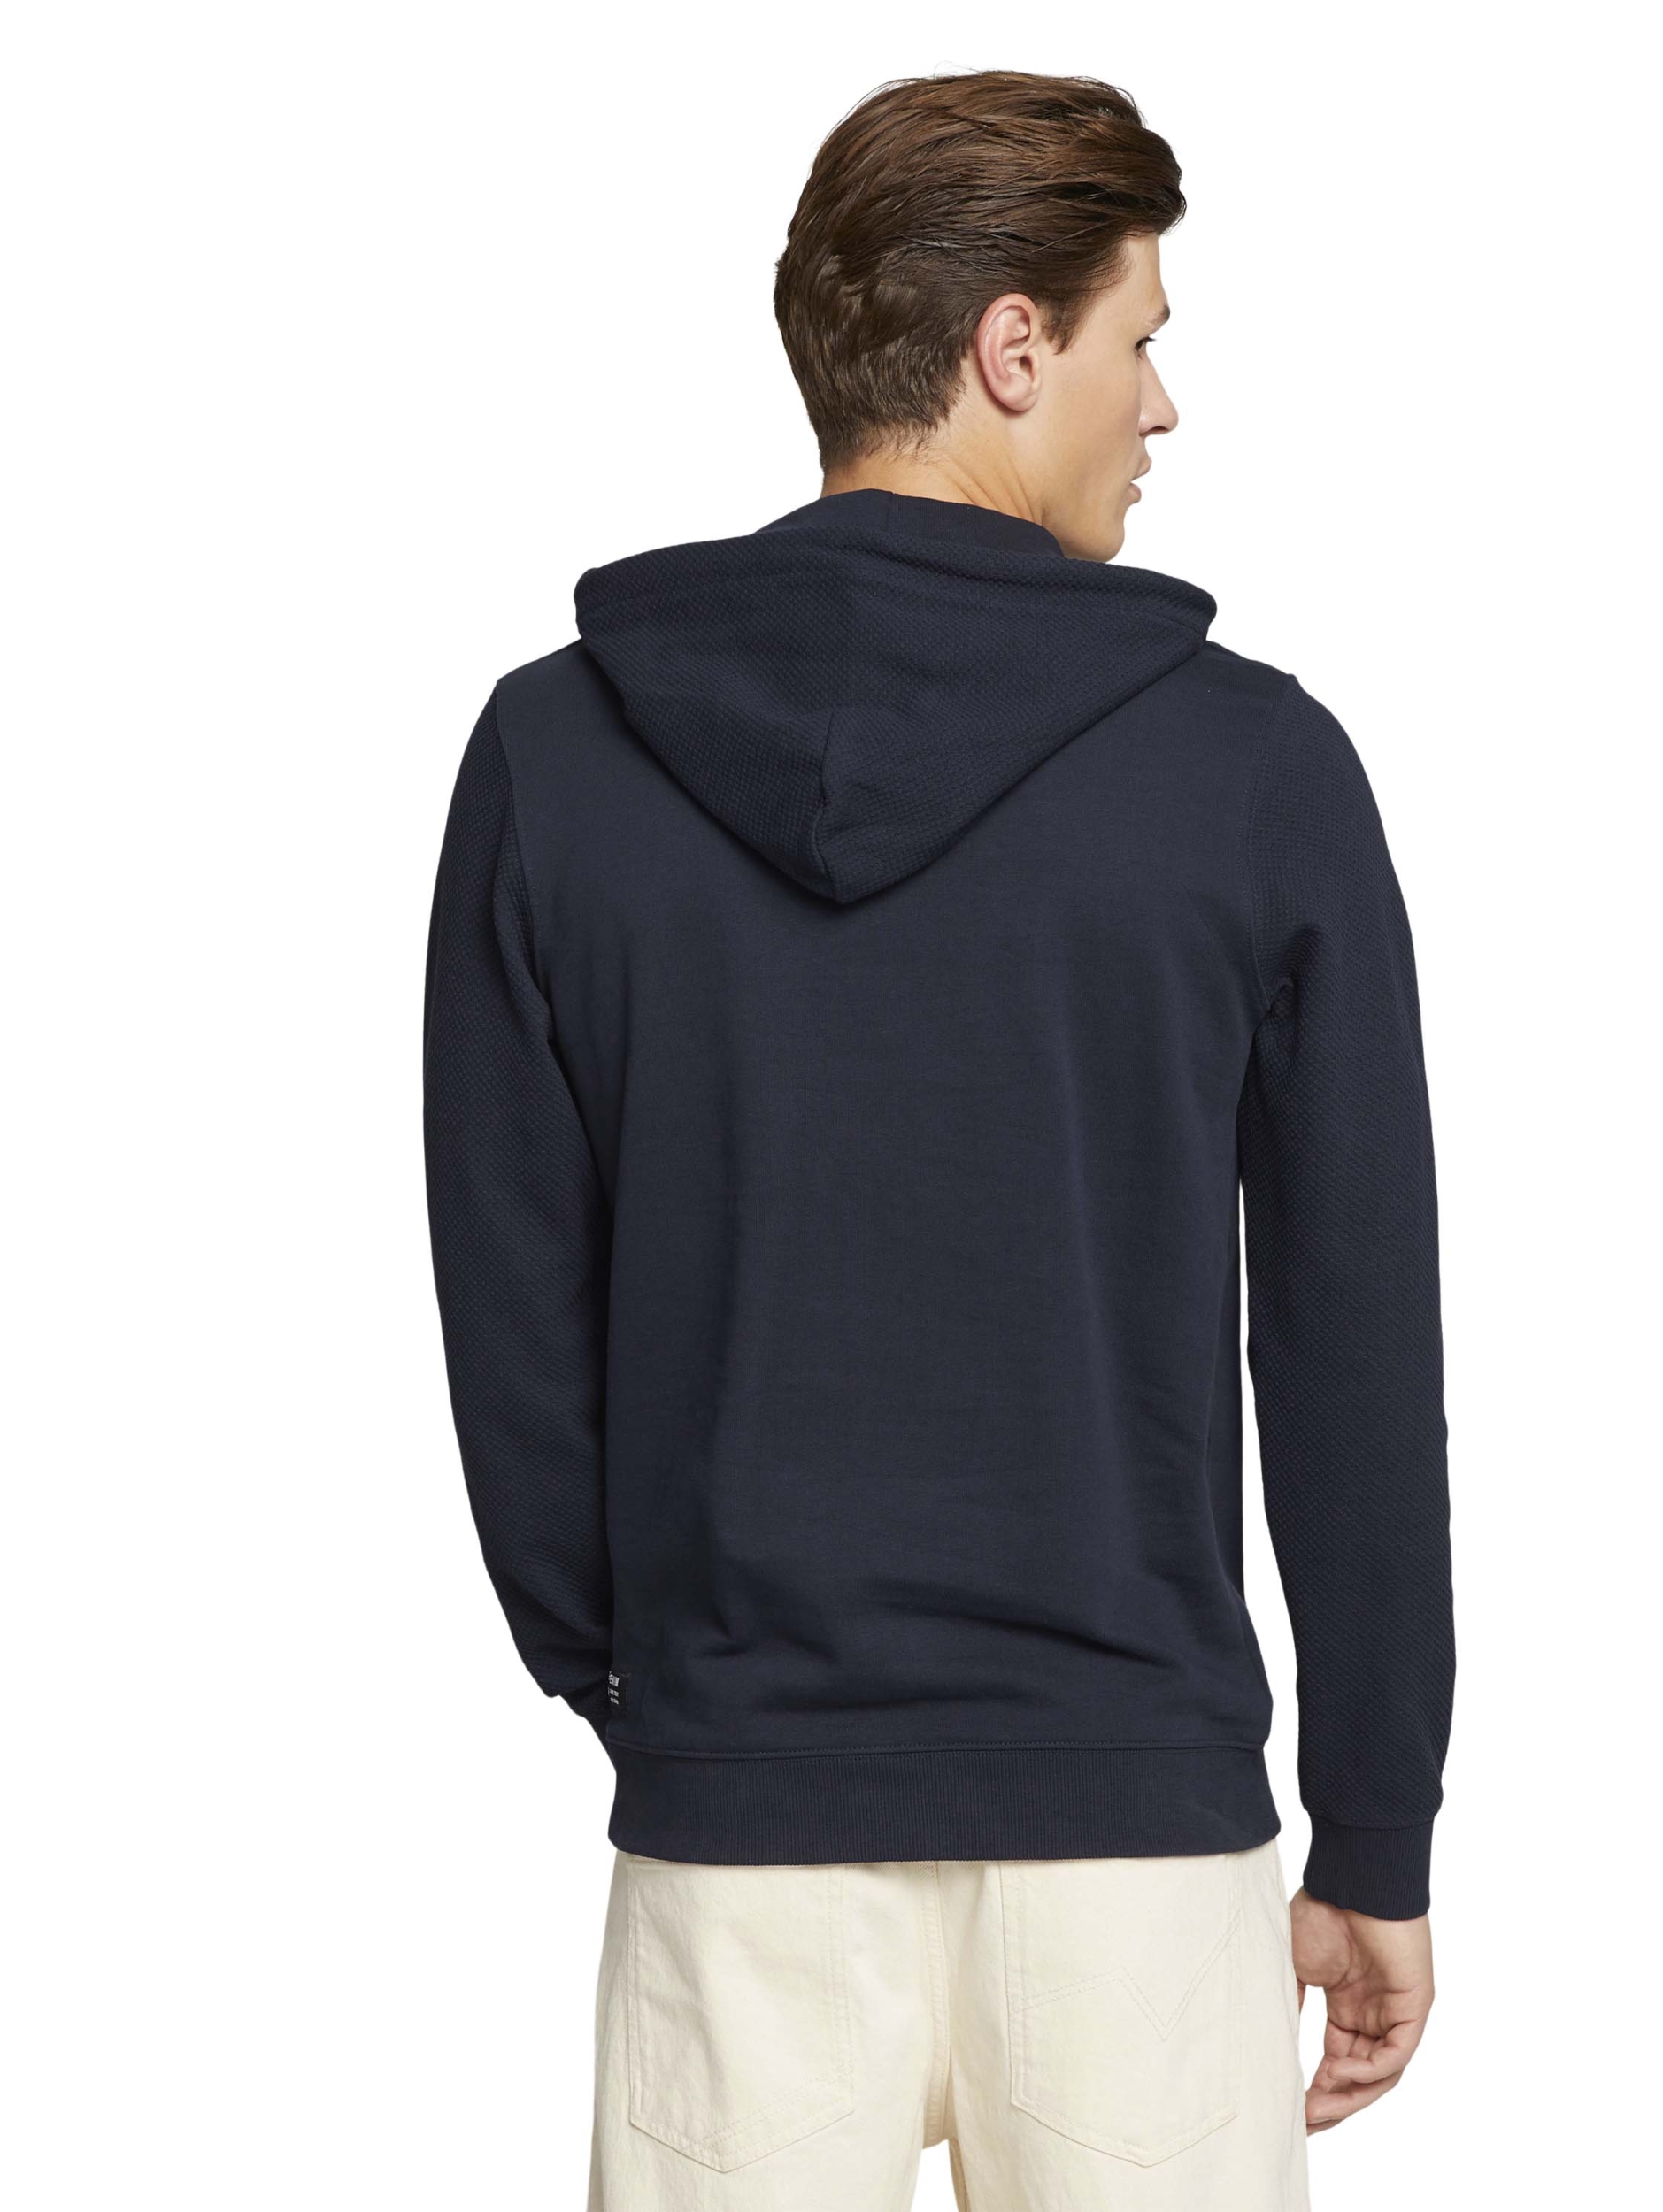 Hoody with structure